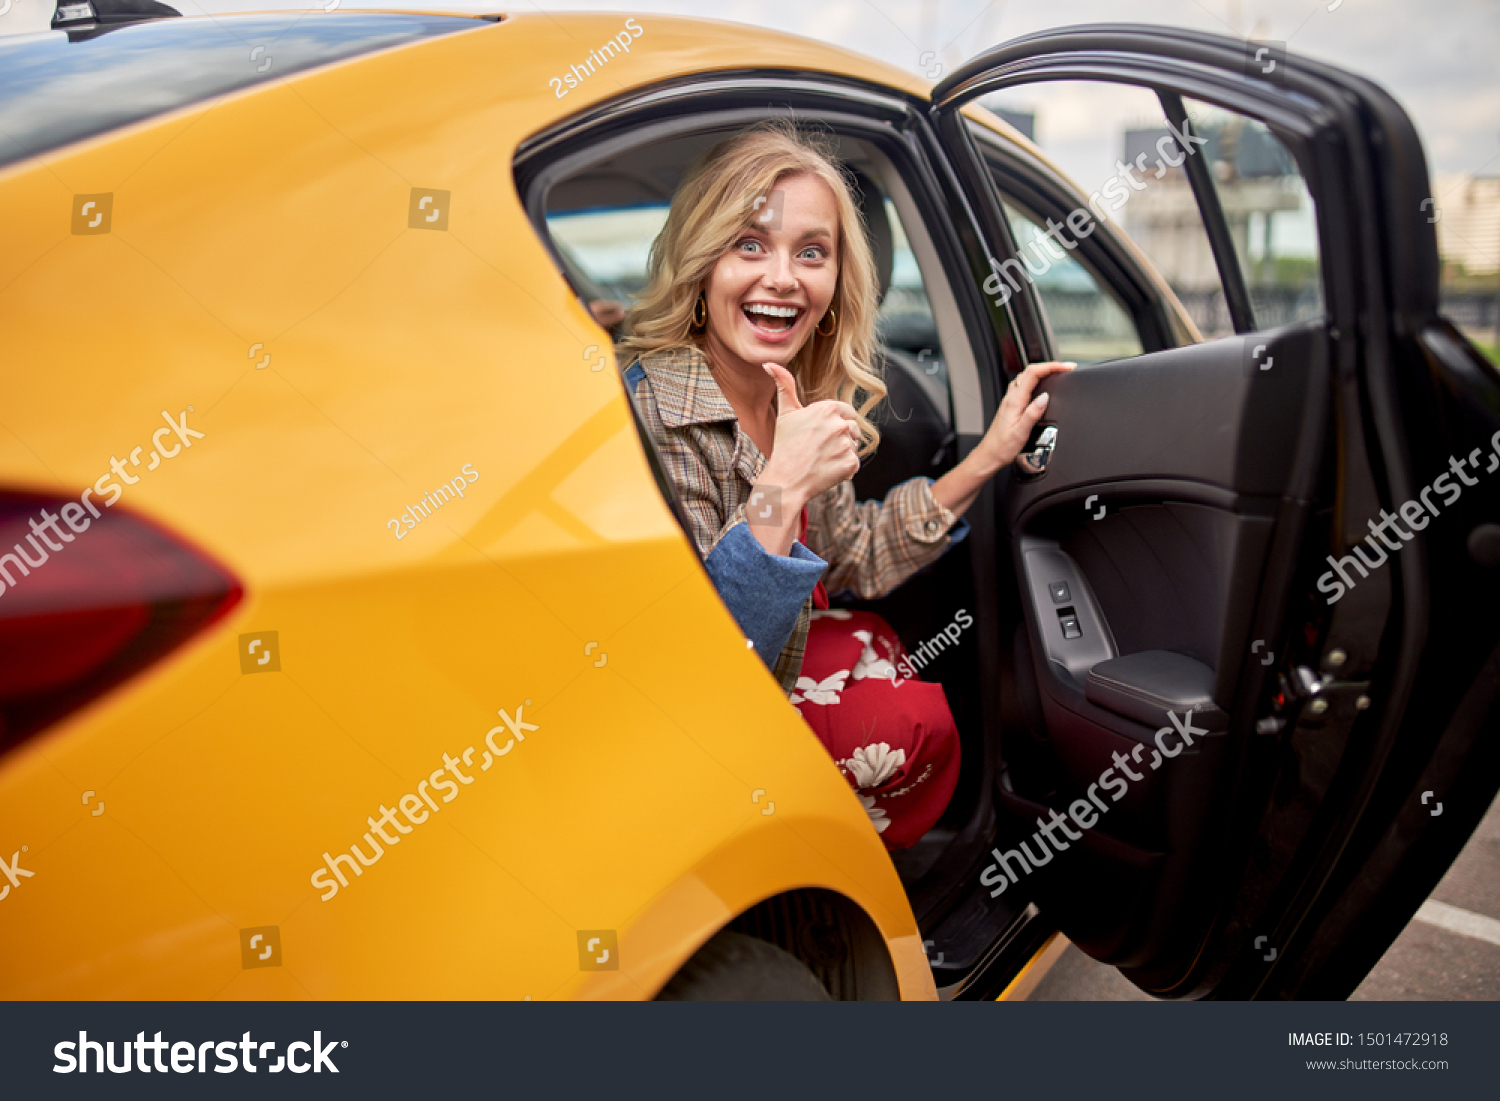 Photo of enthusiastic blonde sitting in back seat of yellow taxi with door open #1501472918